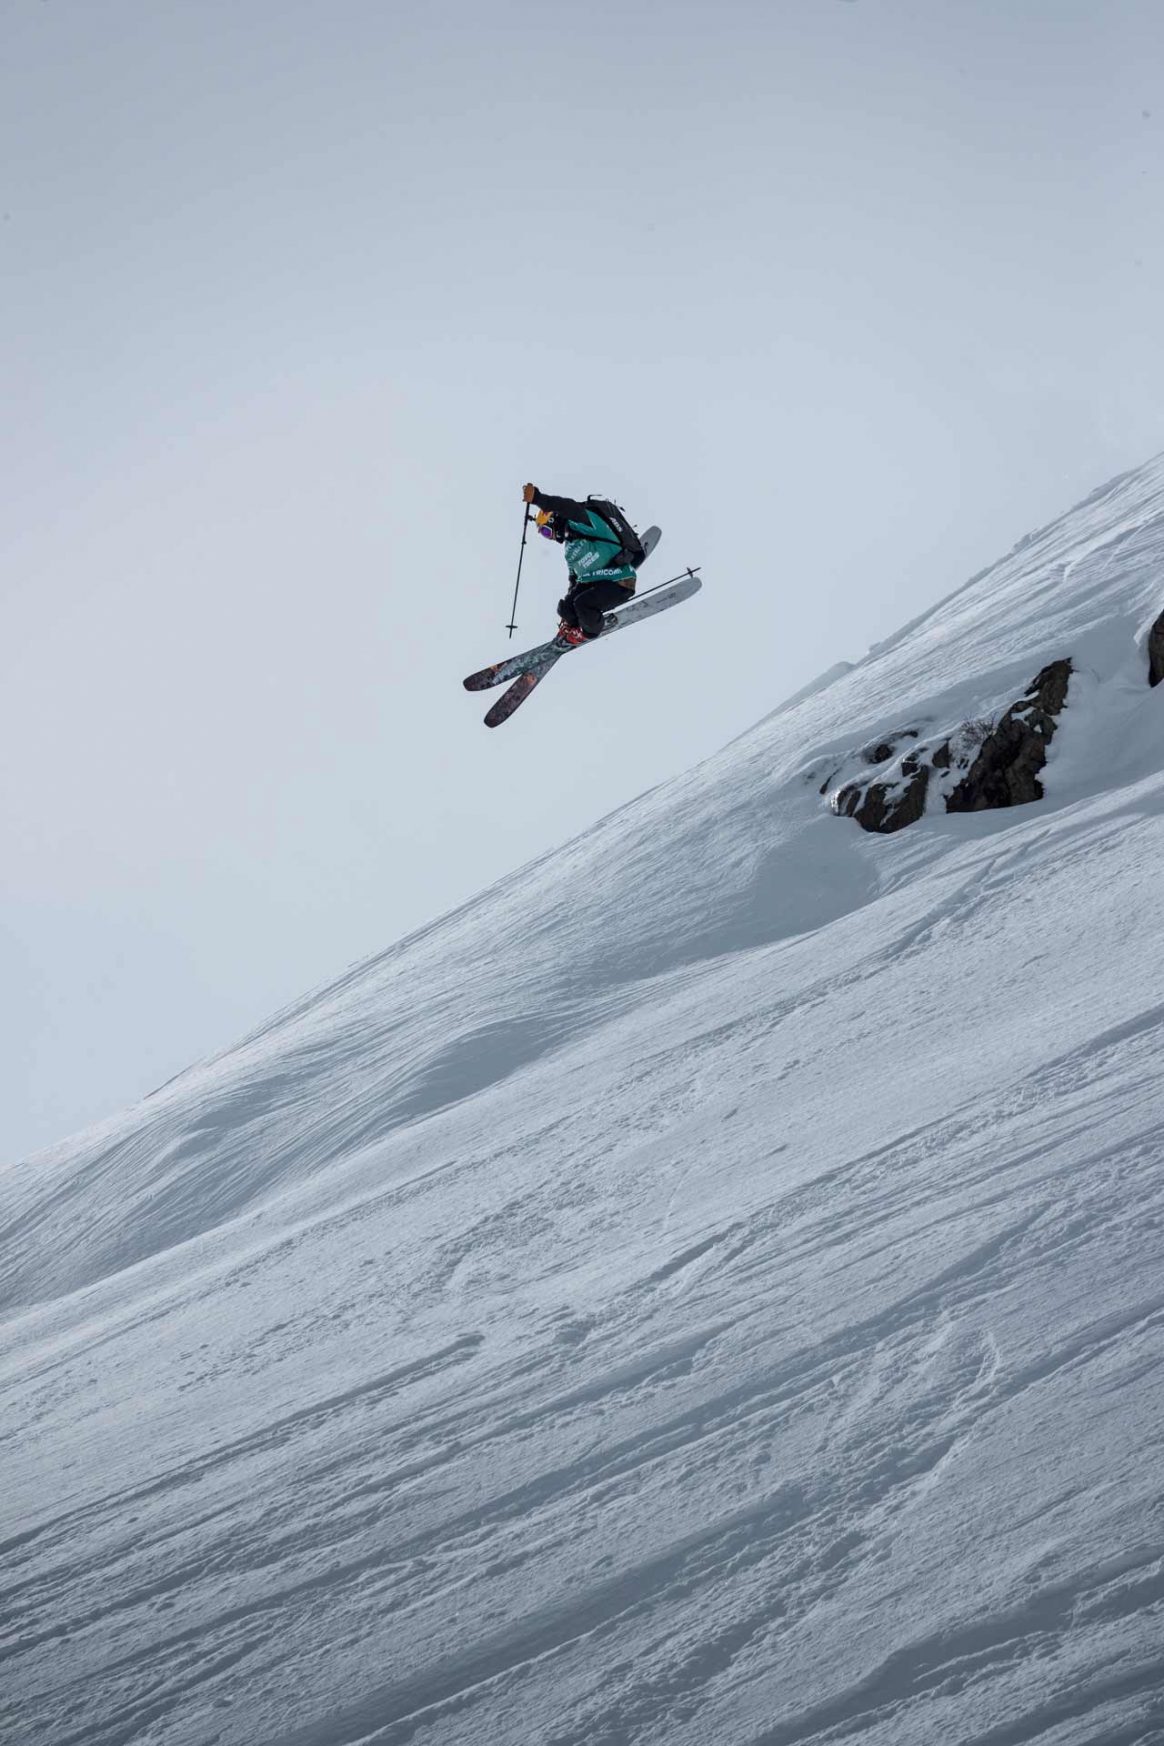 Arianna Tricomi competes in the Freeride World Tour in Hakuba, Japan